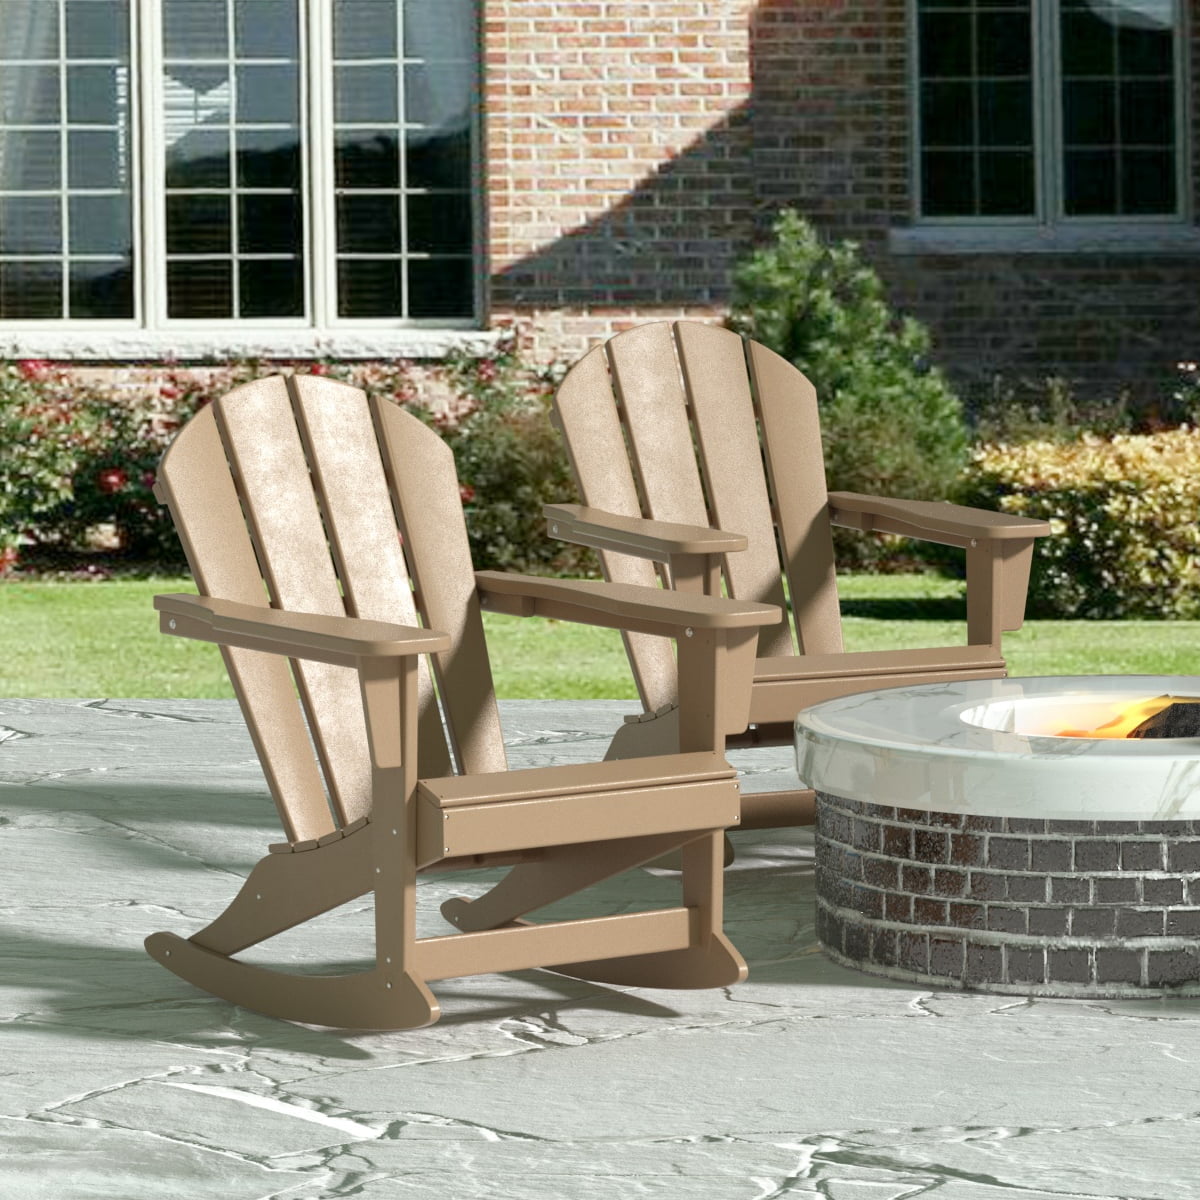 GARDEN Plastic Adirondack Rocking Chair for Outdoor Patio Porch Seating, Weathered Wood - image 1 of 7